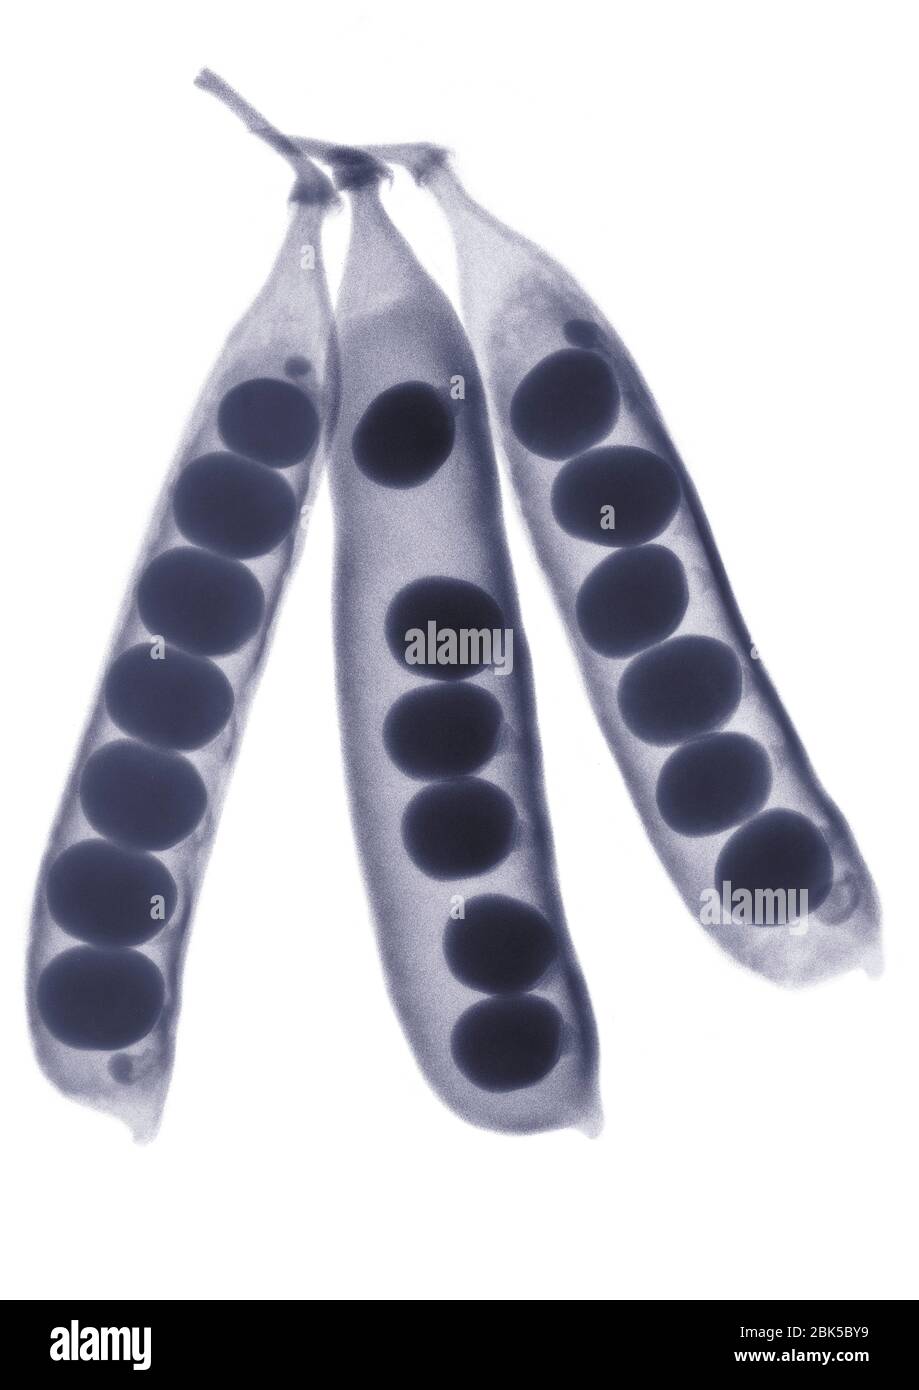 Peas in pods, X-ray. Stock Photo